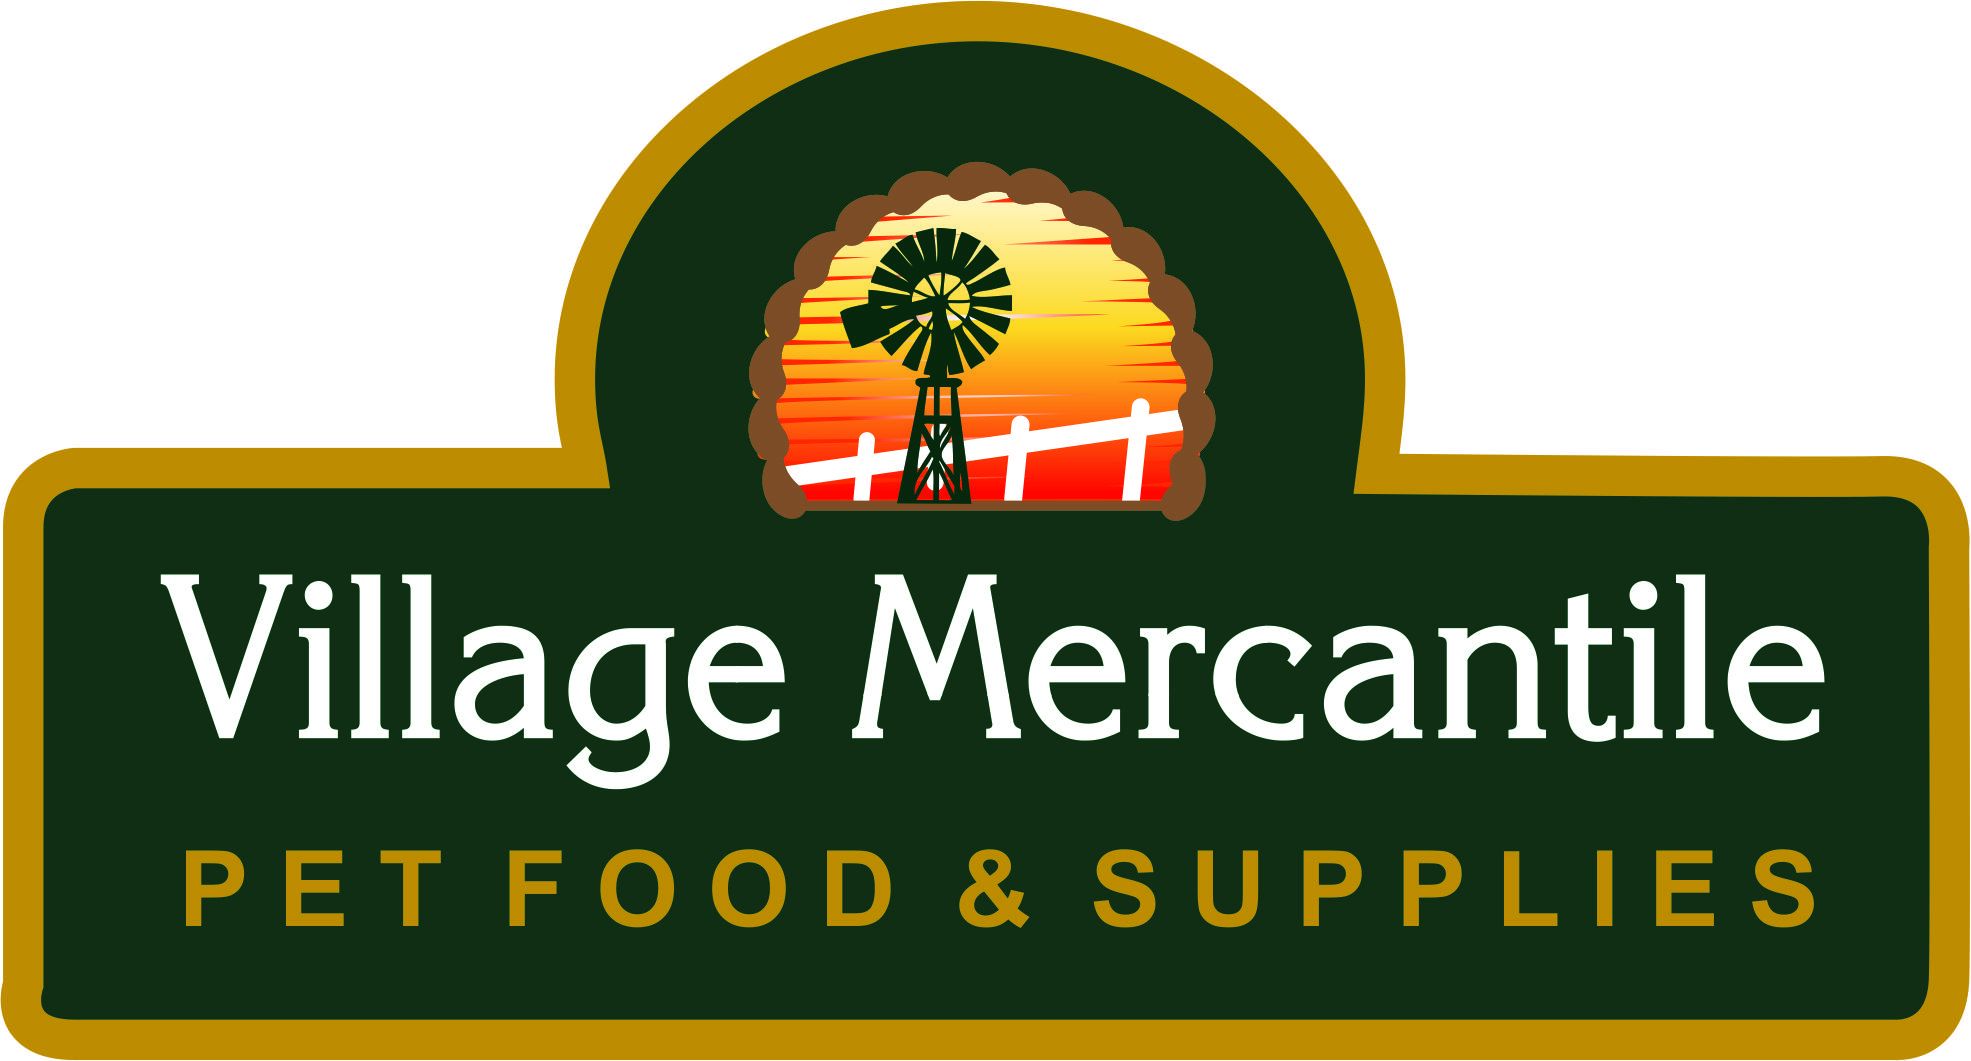 Company logo of Village Mercantile Home and Farm Store